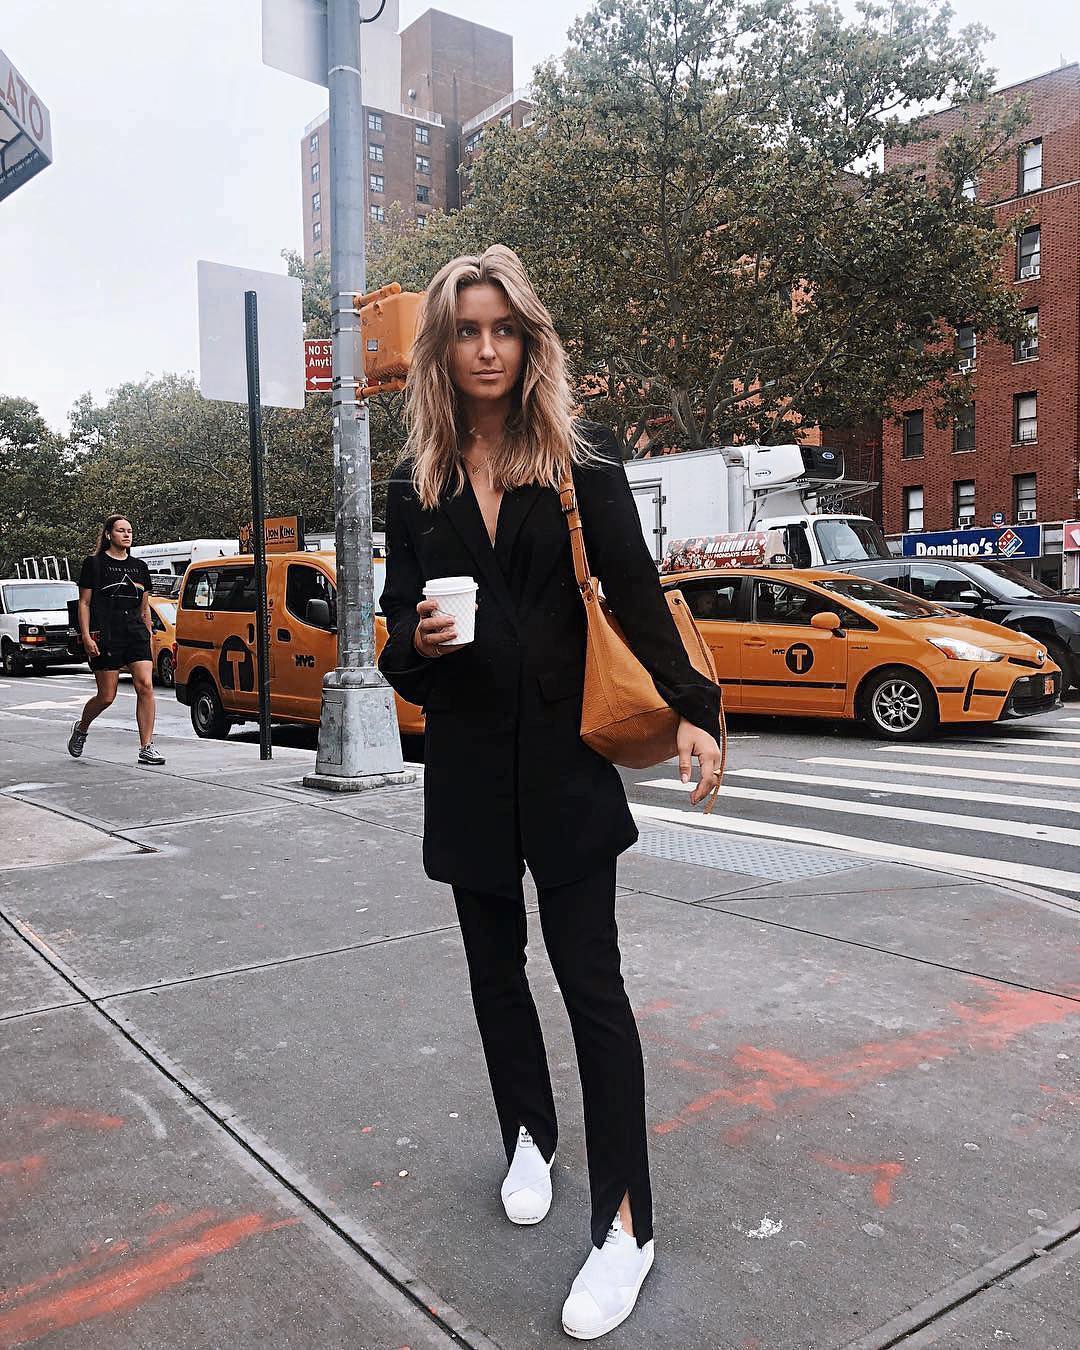 How to wear a black pant suit this fall 2021